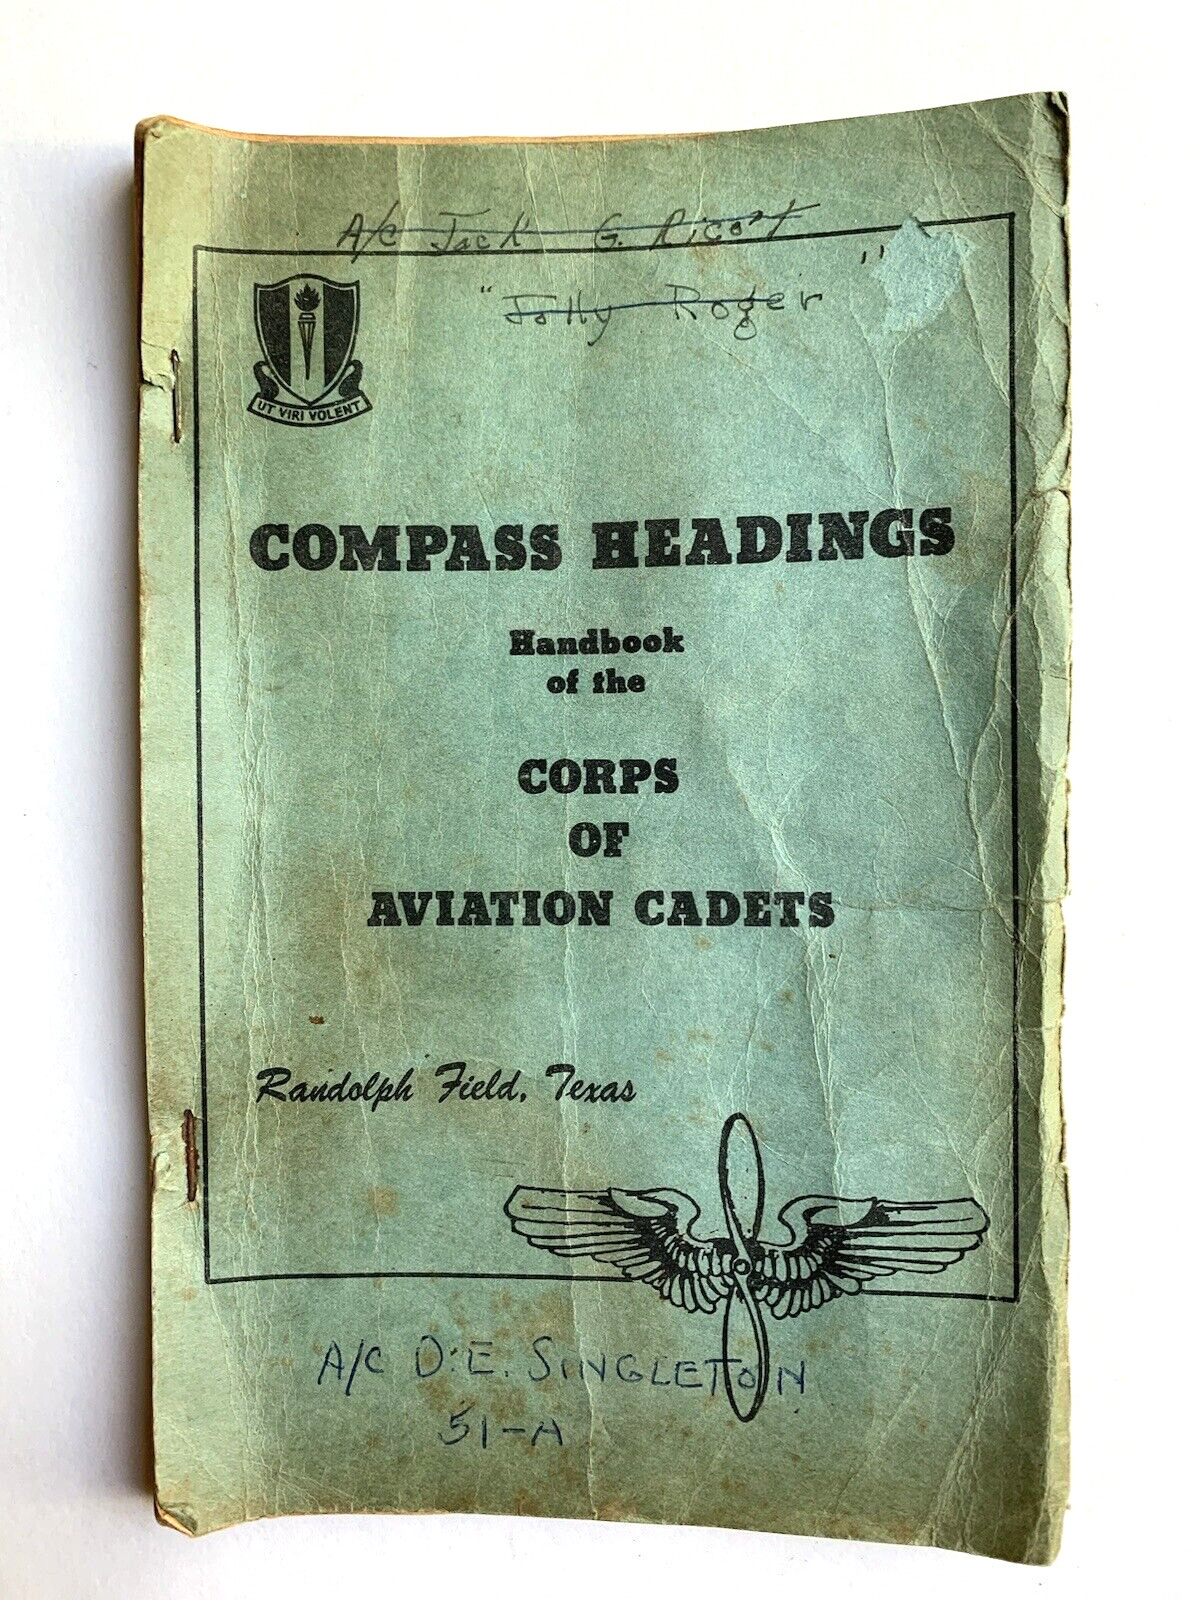 Handbook for Army Corps of Aviation Cadets Randolph Field Texas c.1940s Vintage